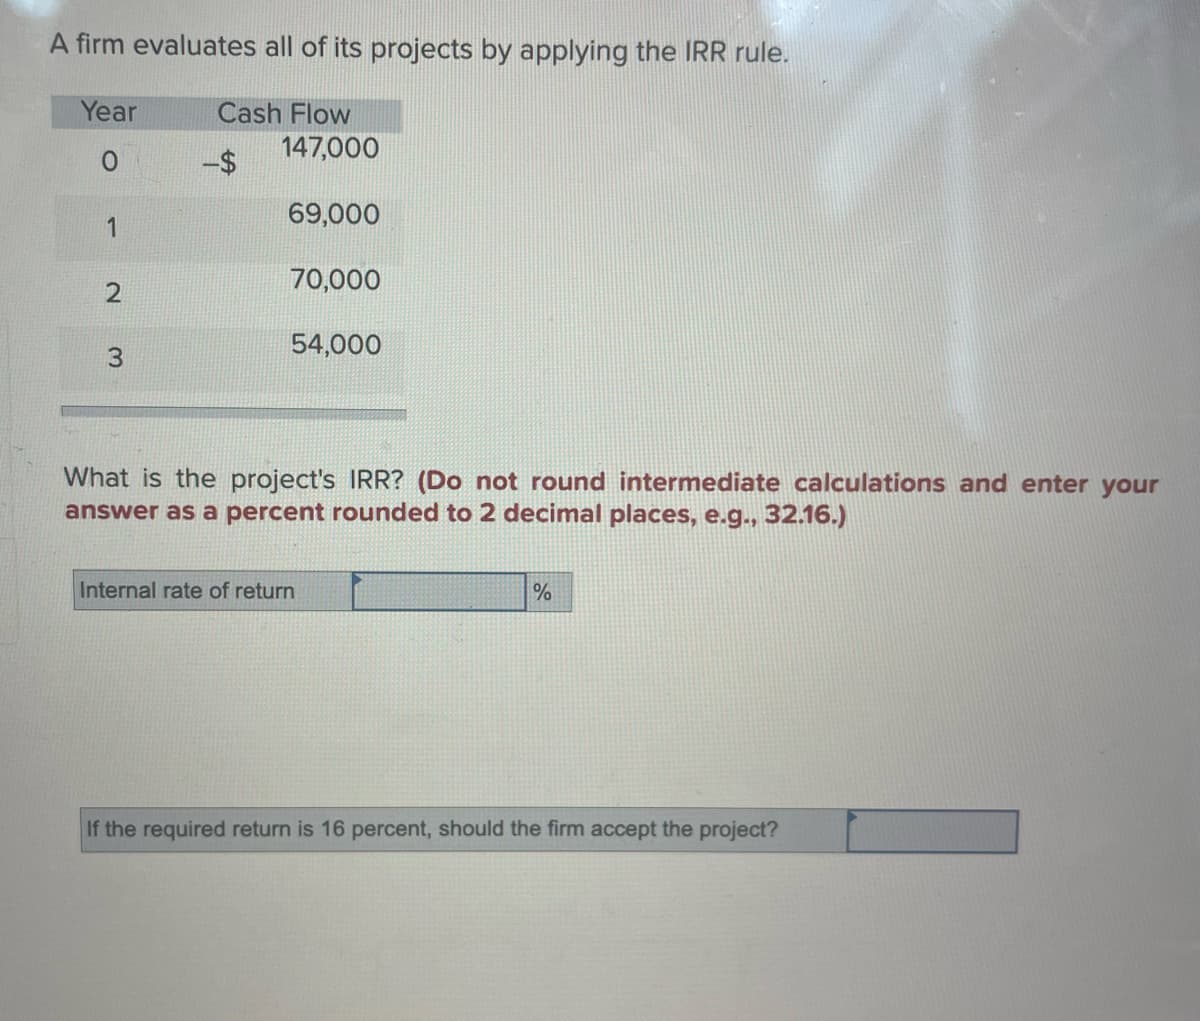 A firm evaluates all of its projects by applying the IRR rule.
Cash Flow
Year
0
1
2
3
147,000
69,000
70,000
54,000
What is the project's IRR? (Do not round intermediate calculations and enter your
answer as a percent rounded to 2 decimal places, e.g., 32.16.)
Internal rate of return
%
If the required return is 16 percent, should the firm accept the project?